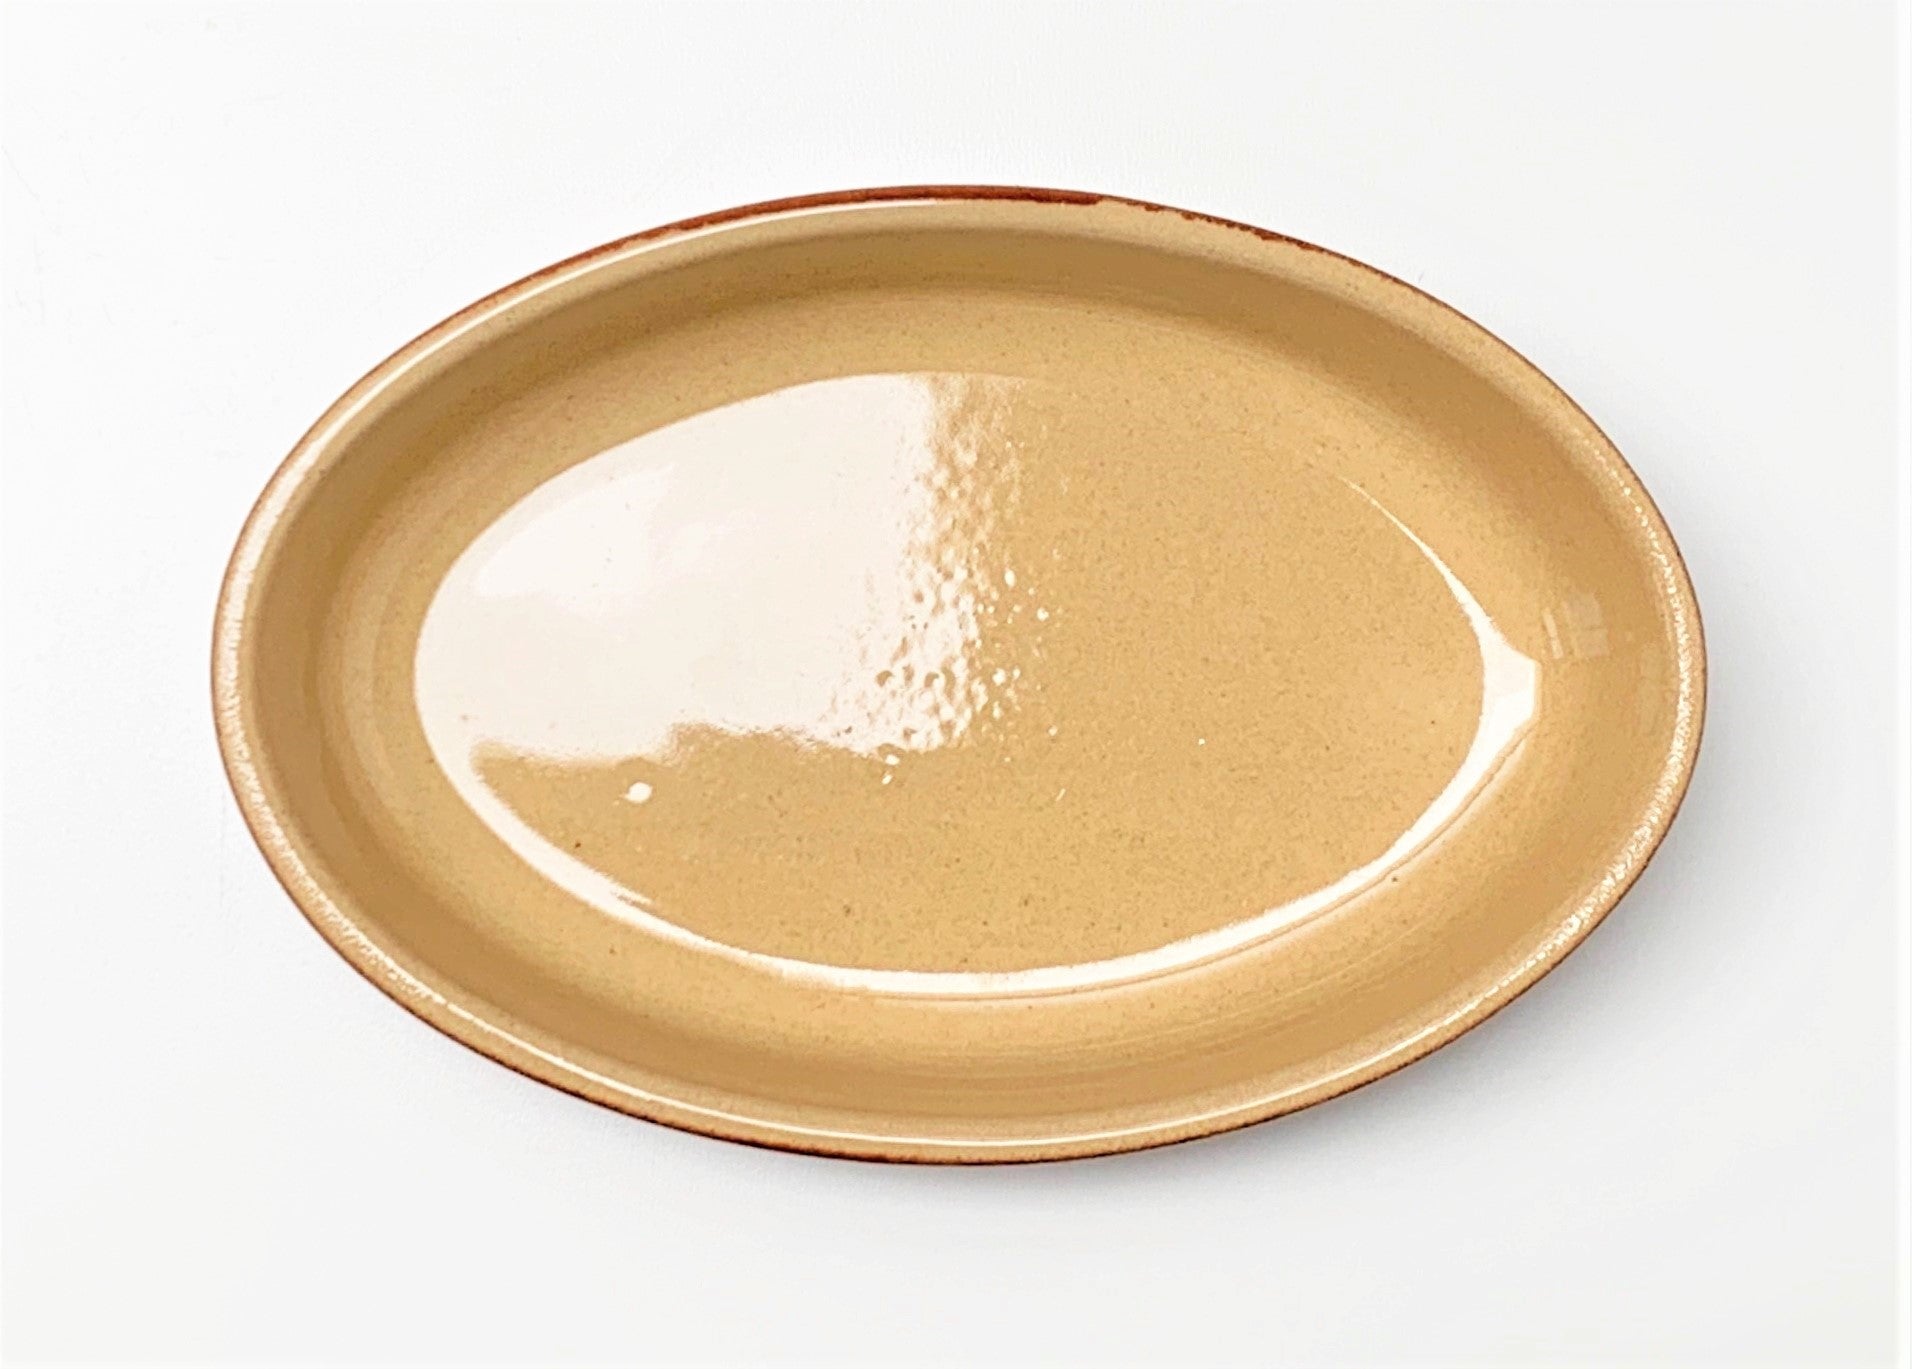 Poterie Renault Oval Dish - Small (.25L) Brown Ceramic Poterie Renault Brand_Poterie Renault Dinnerware_Bowls & Plates Home_Decor Kitchen_Dinnerware New Arrivals Poterie Renault Pc81b0.25L3